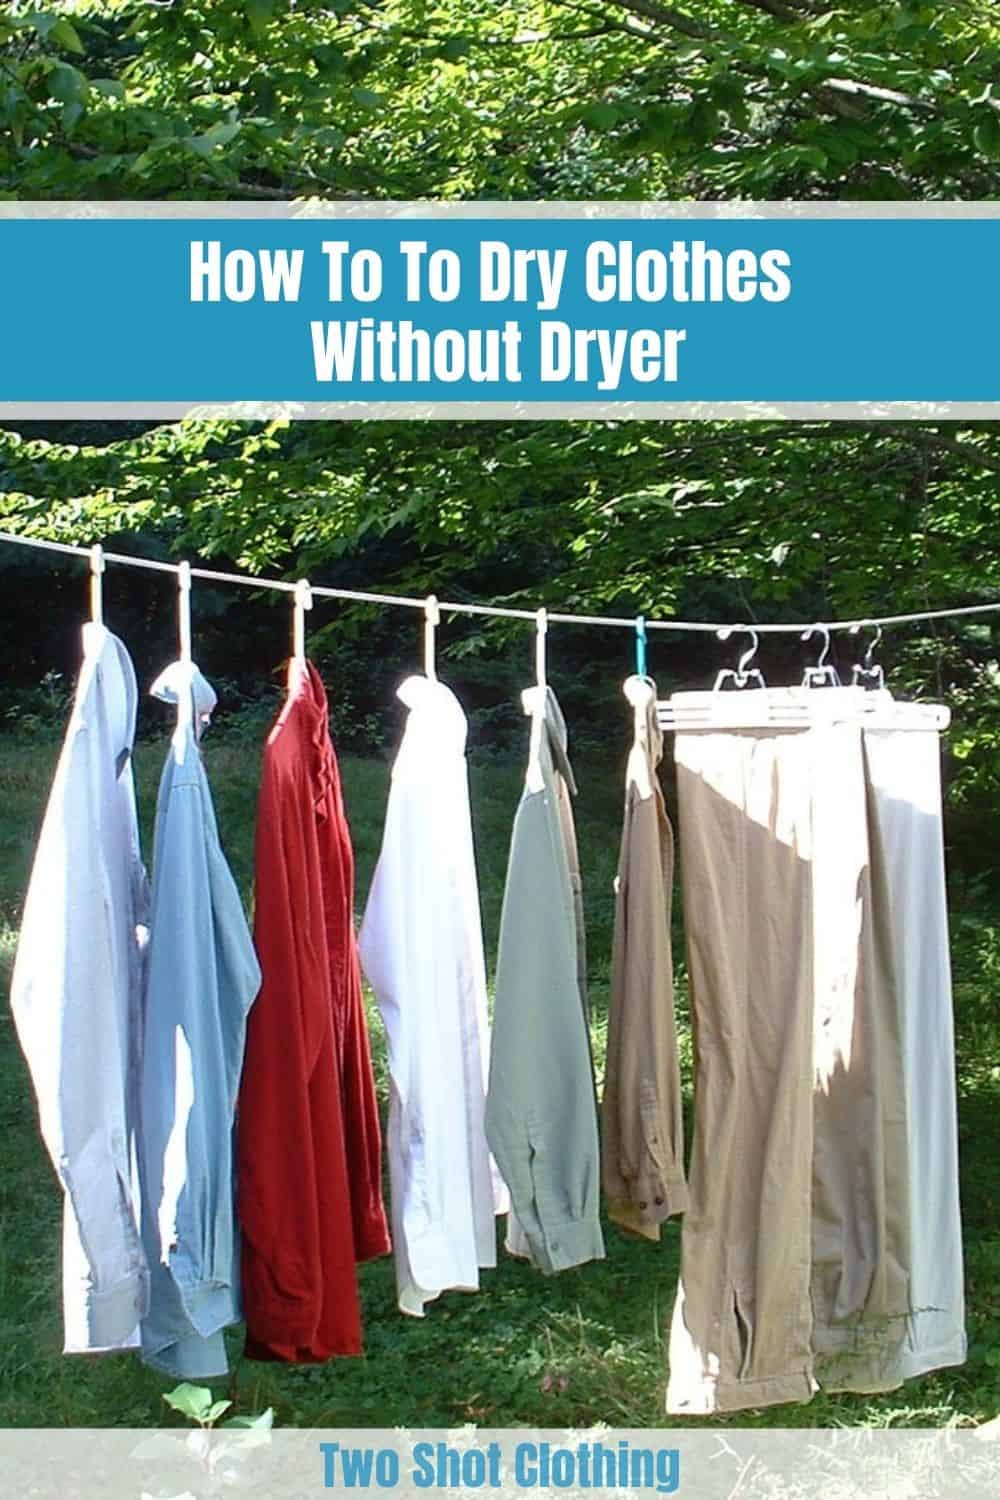 how to Dry Clothes Without Dryer